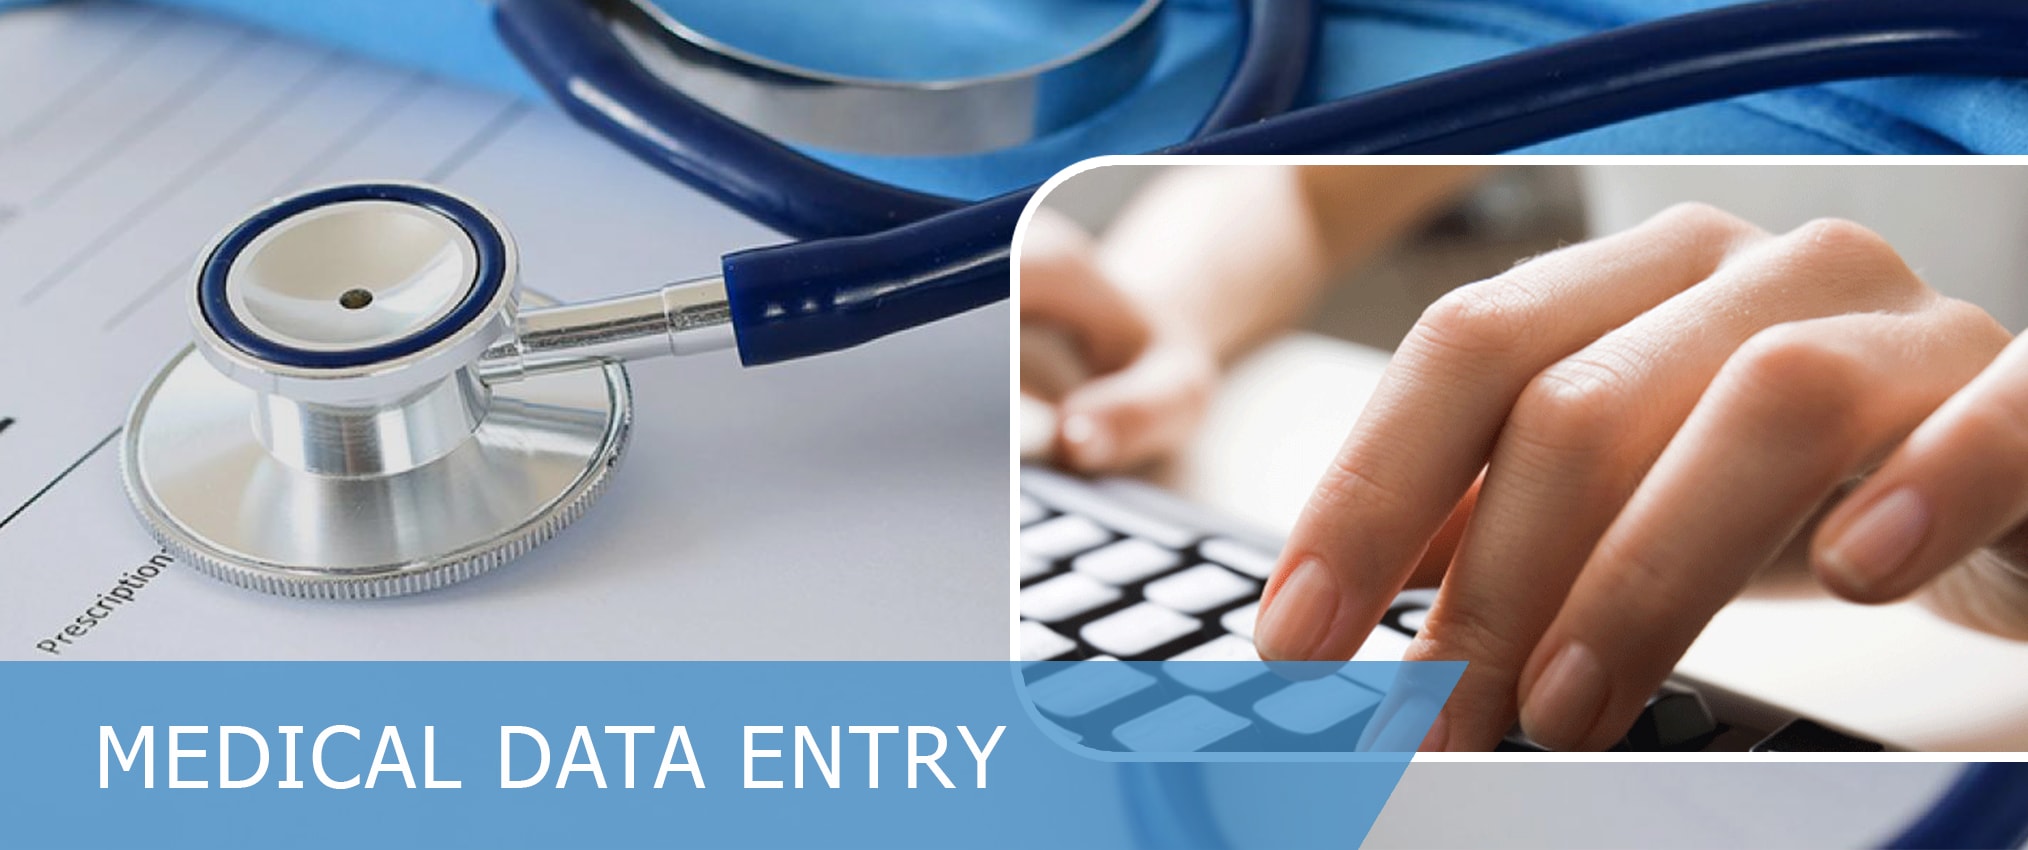 outsourcing medical data entry